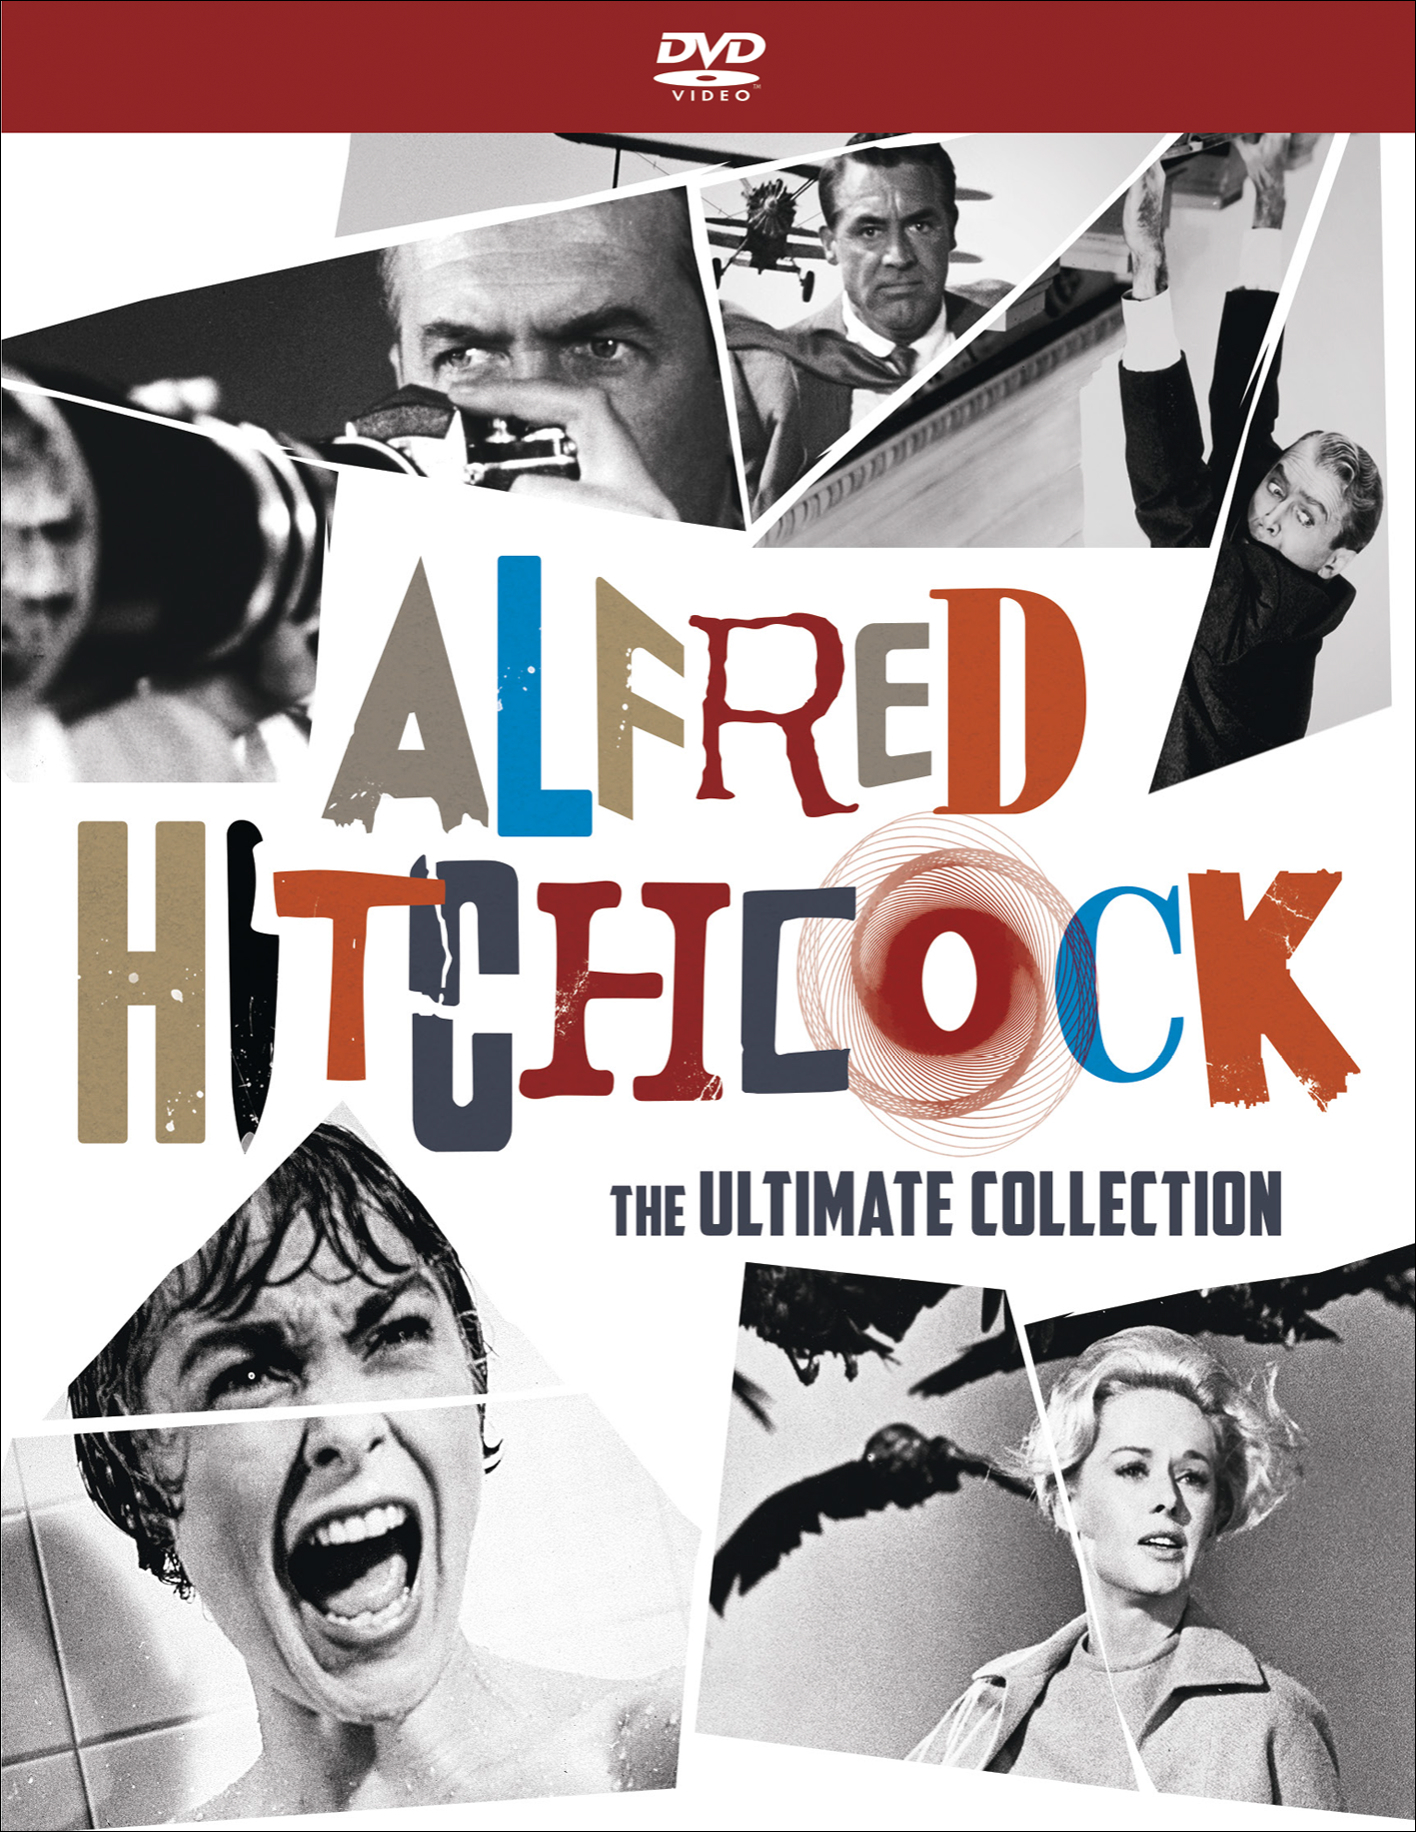 Alfred Hitchcock: The Ultimate Collection (DVD Set) - DVD   - Drama Movies On DVD - Movies On GRUV